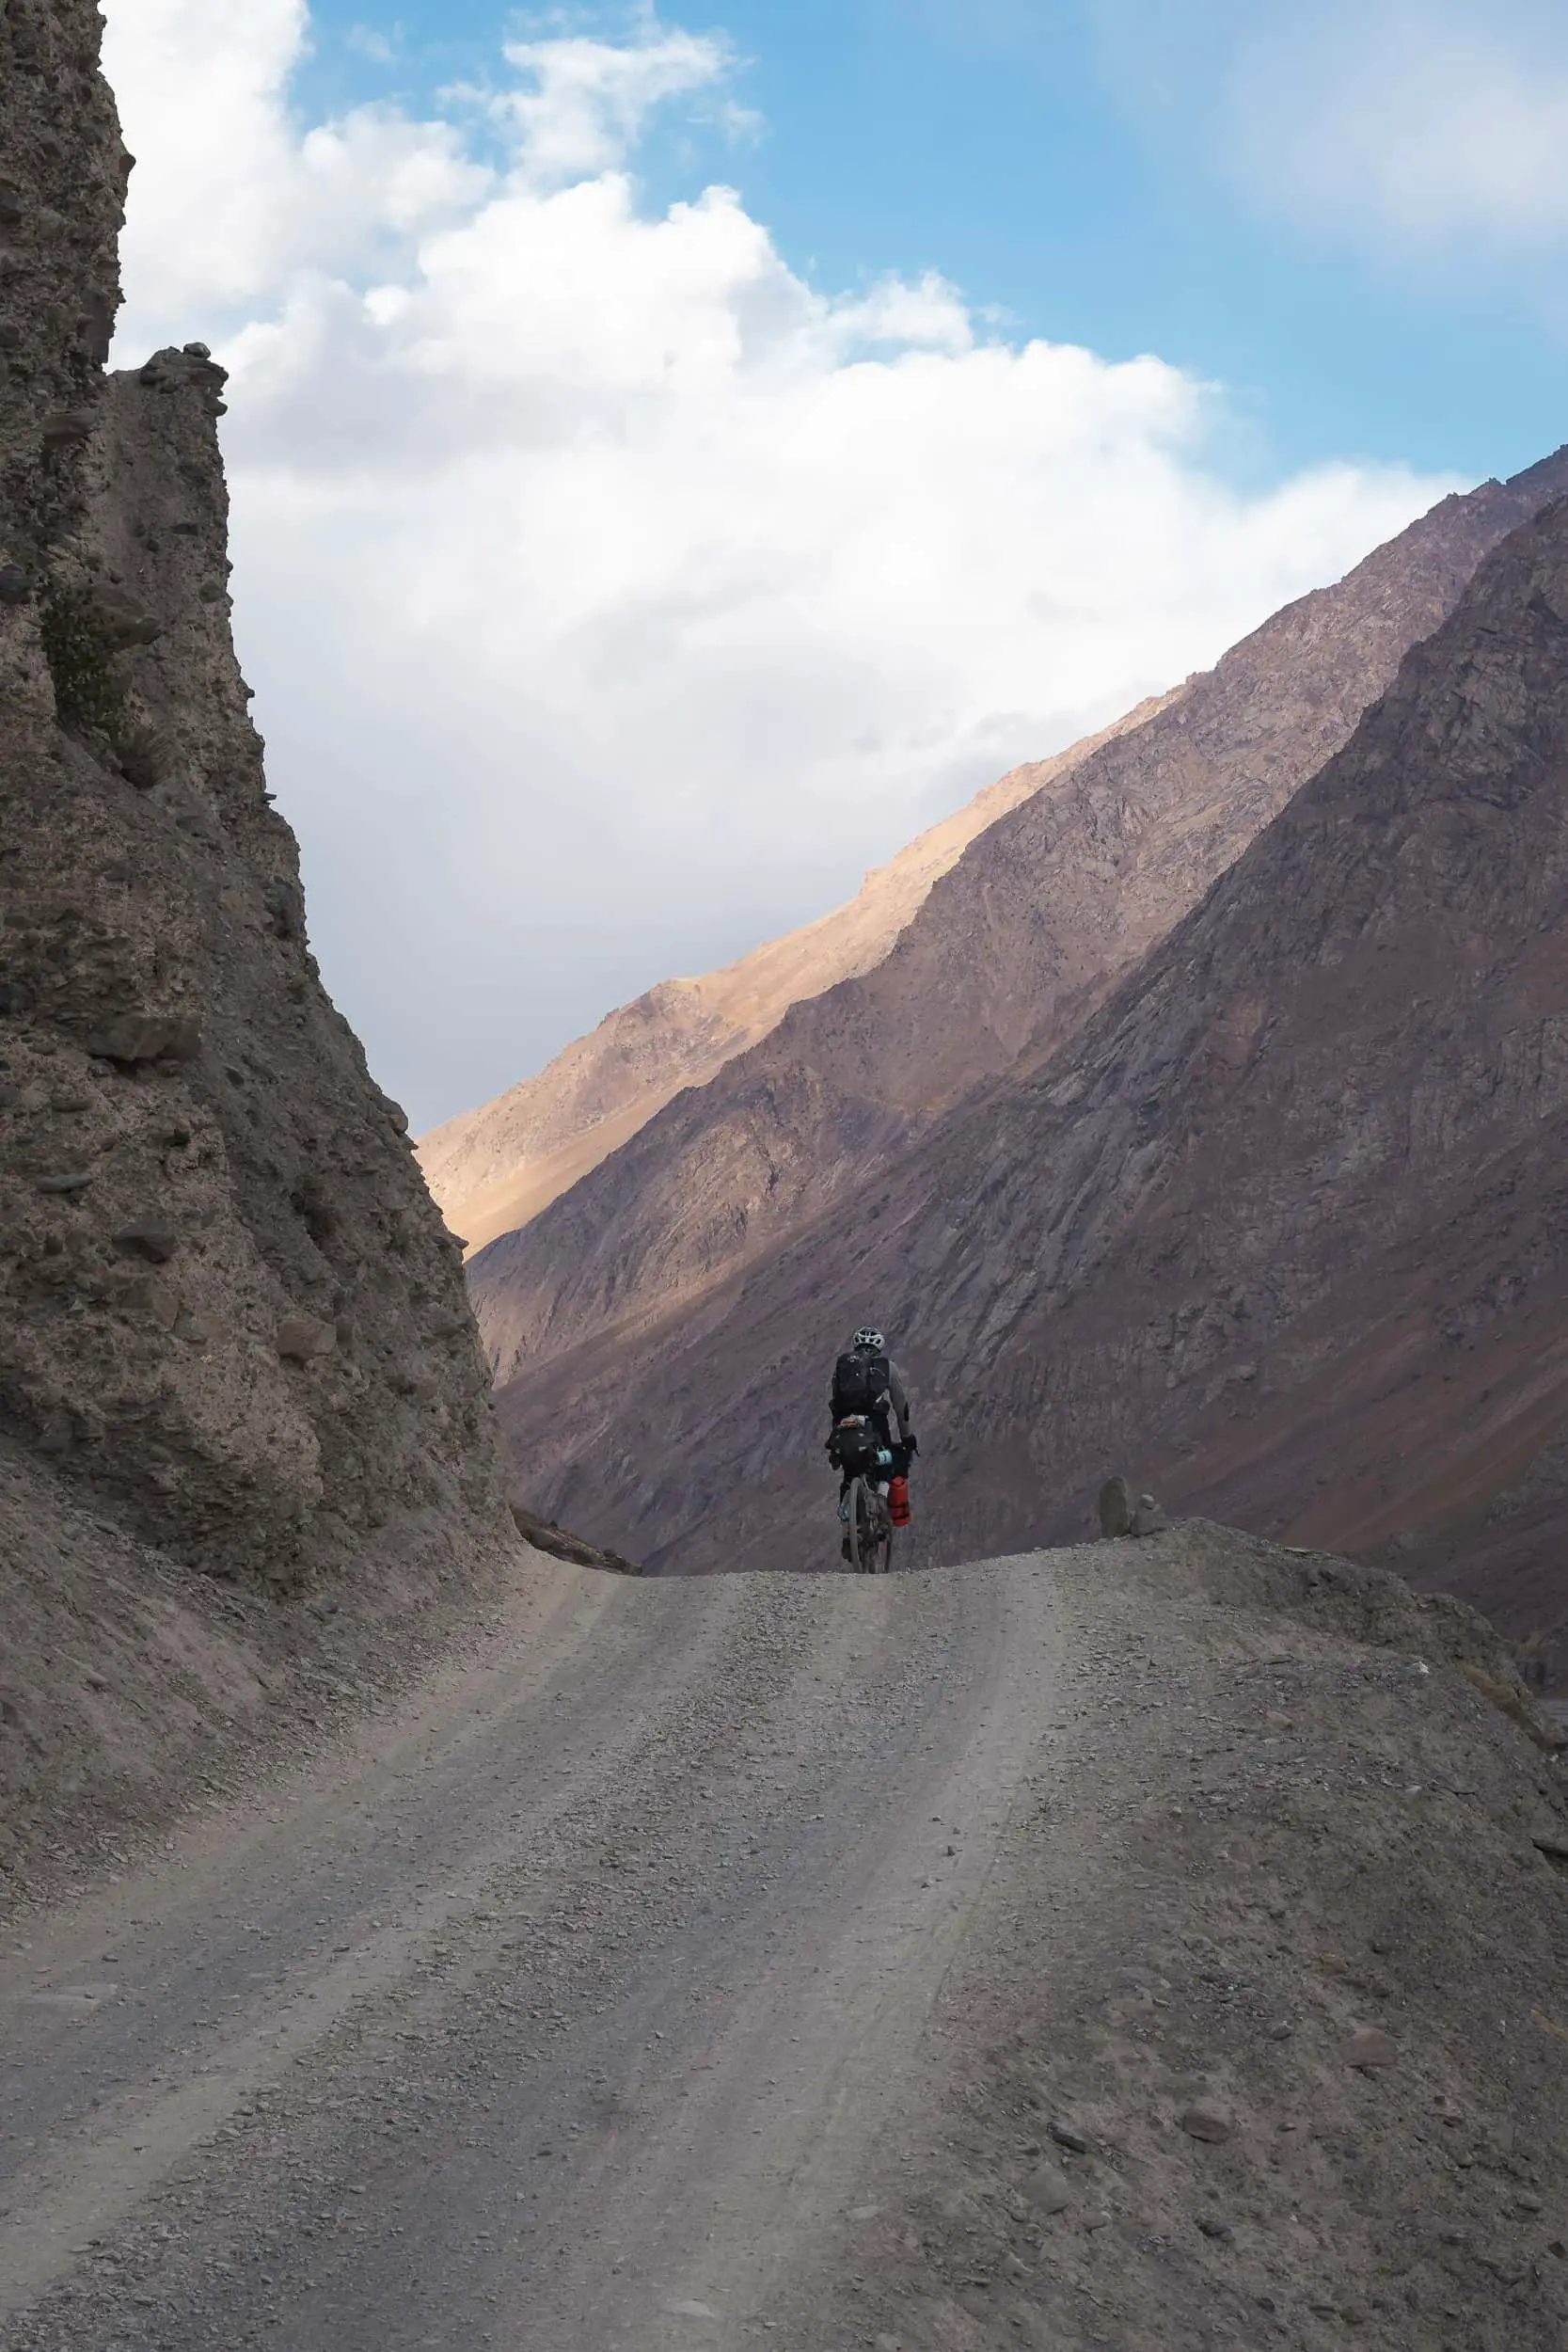 Andrew bikepacking the Bartang Valley